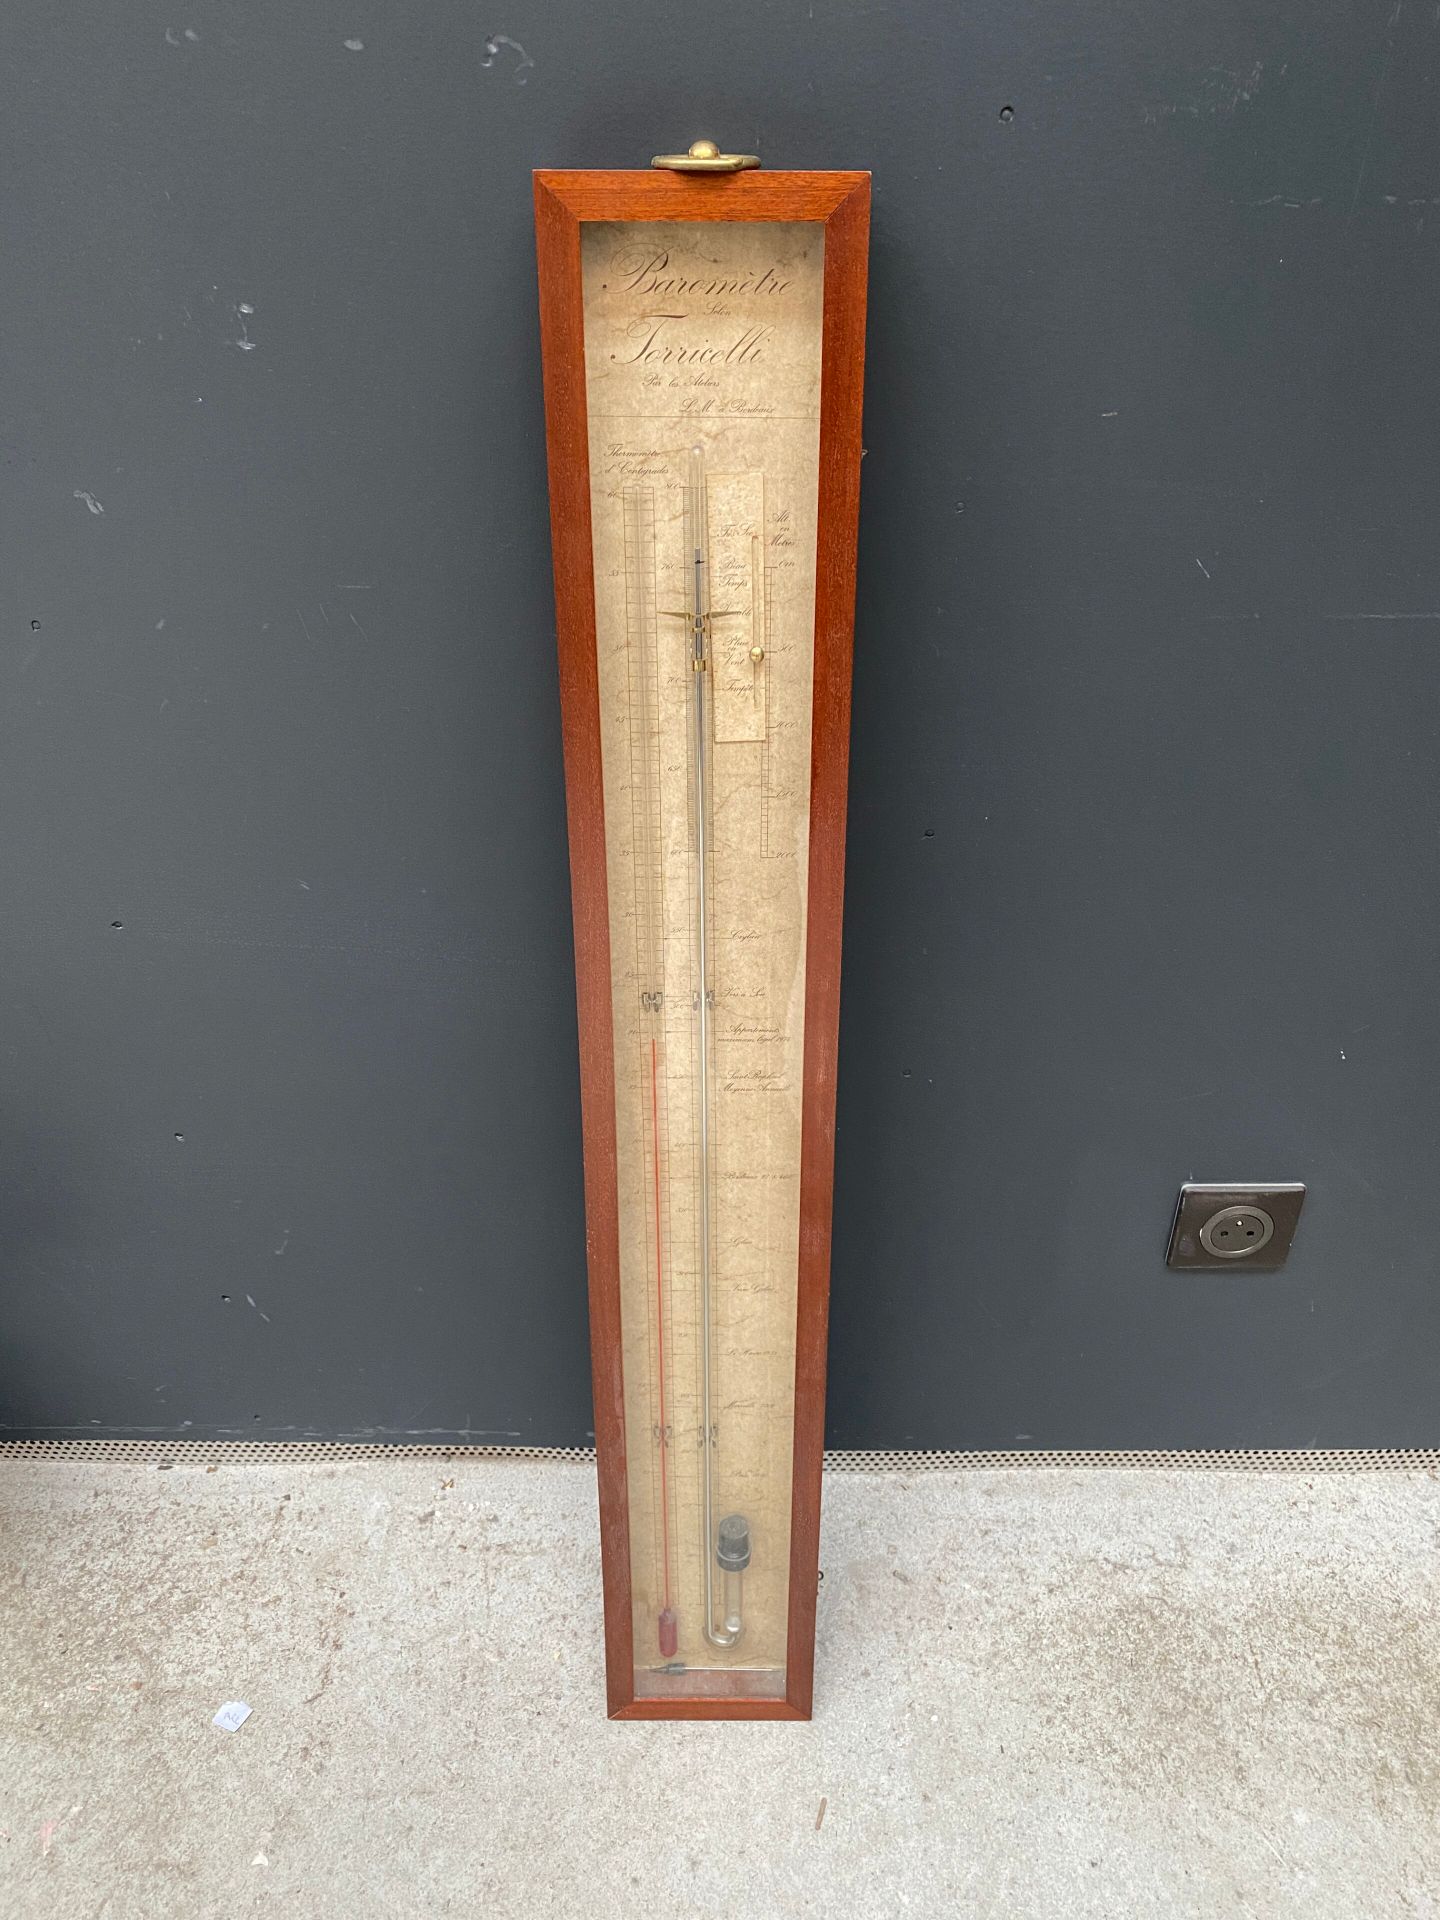 Null Barometer - thermometer Torricelli

107 x 15 cm